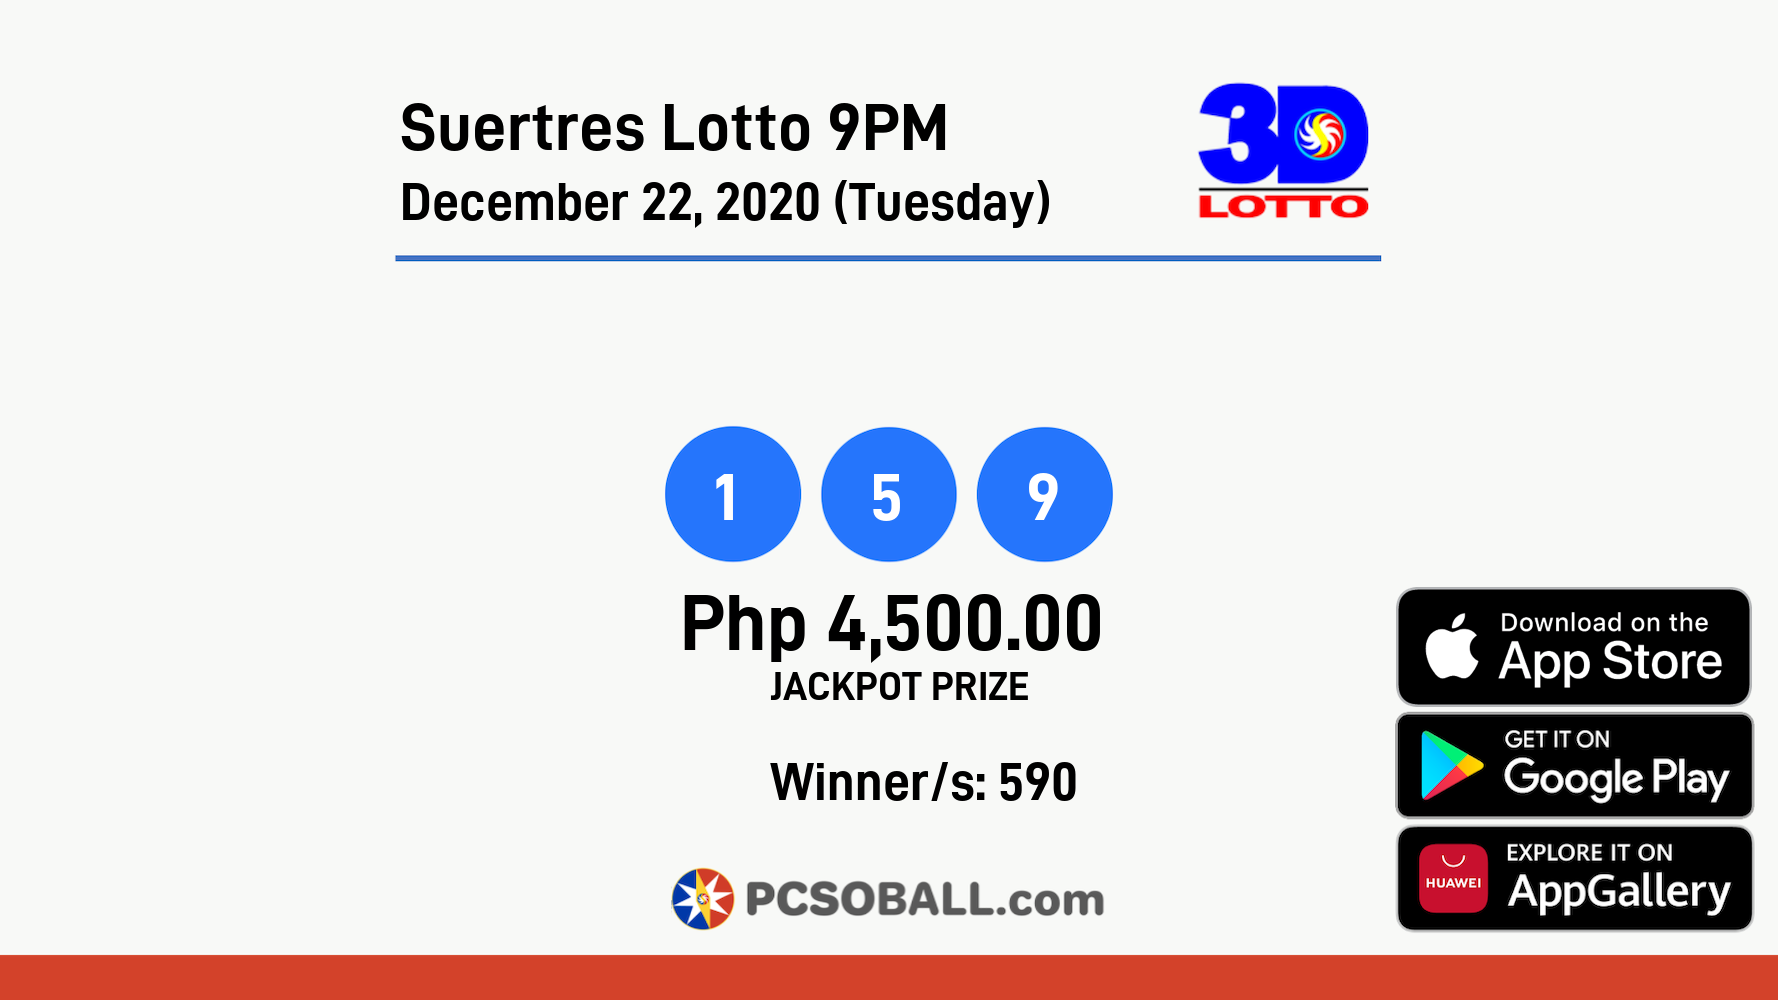 Suertres Lotto 9PM December 22, 2020 (Tuesday) Result